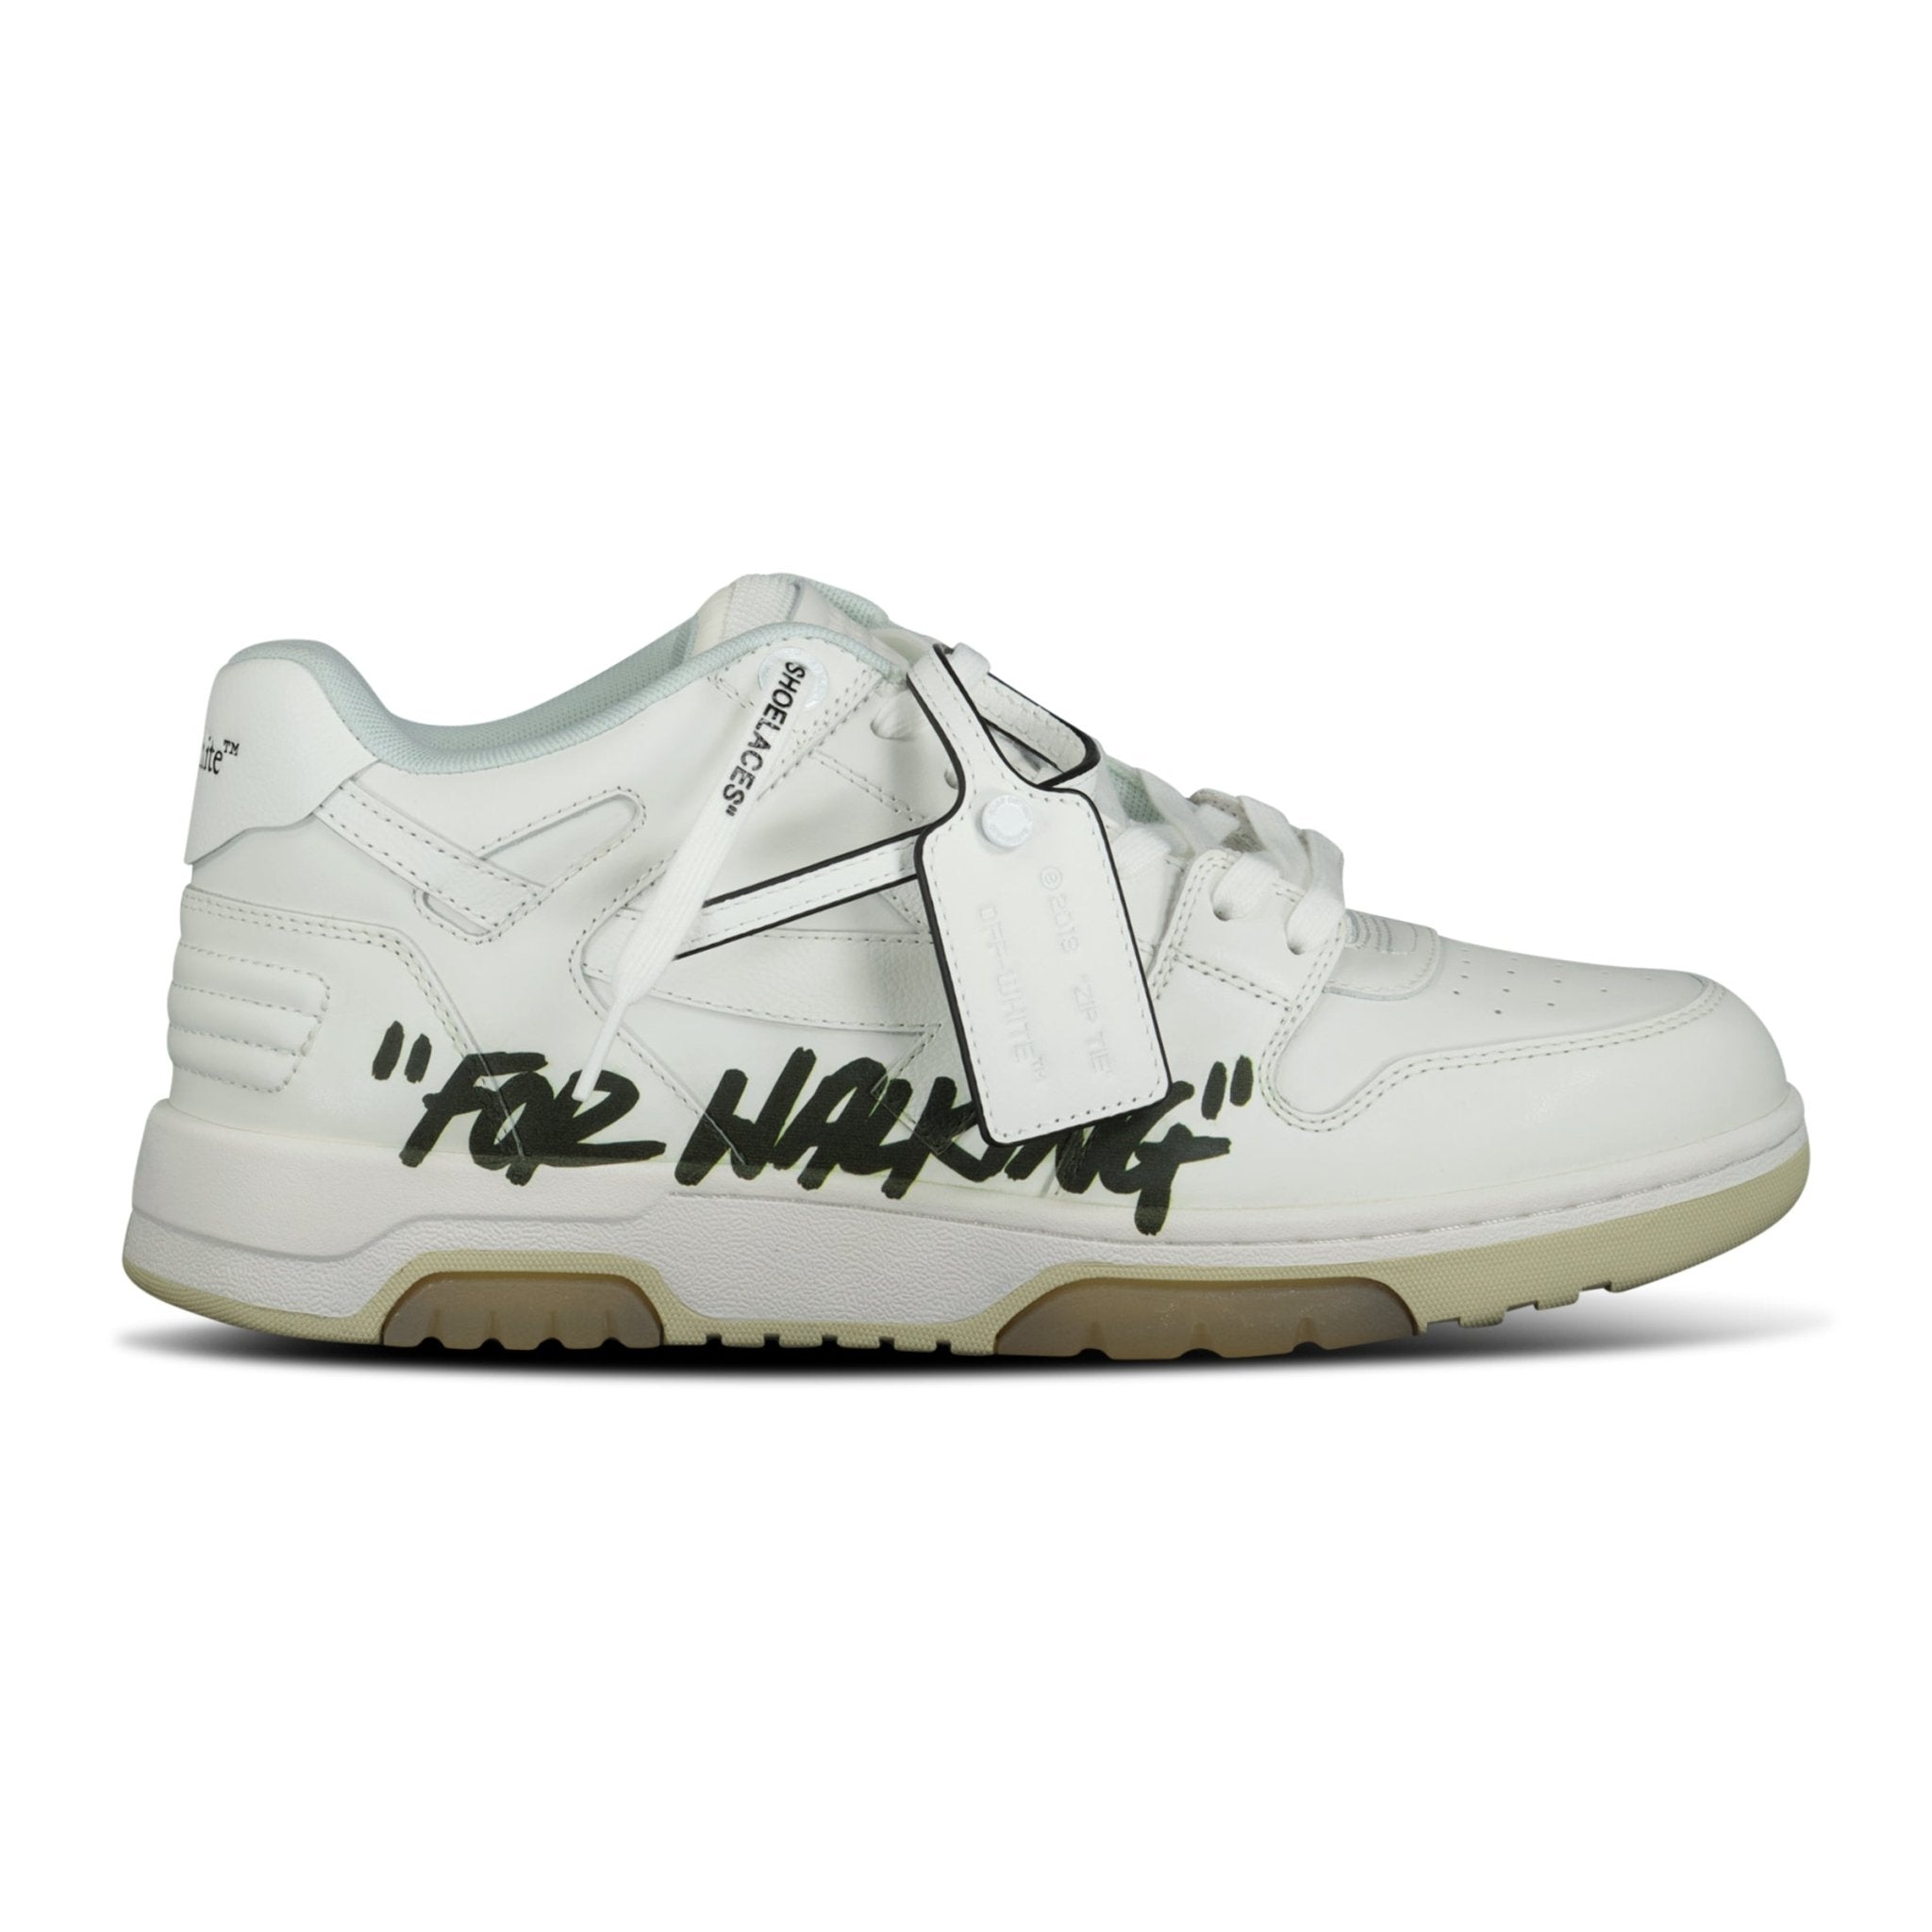 OFF-WHITE 'For Walking' Out Of Office Low-Top Leather Trainers White & Black